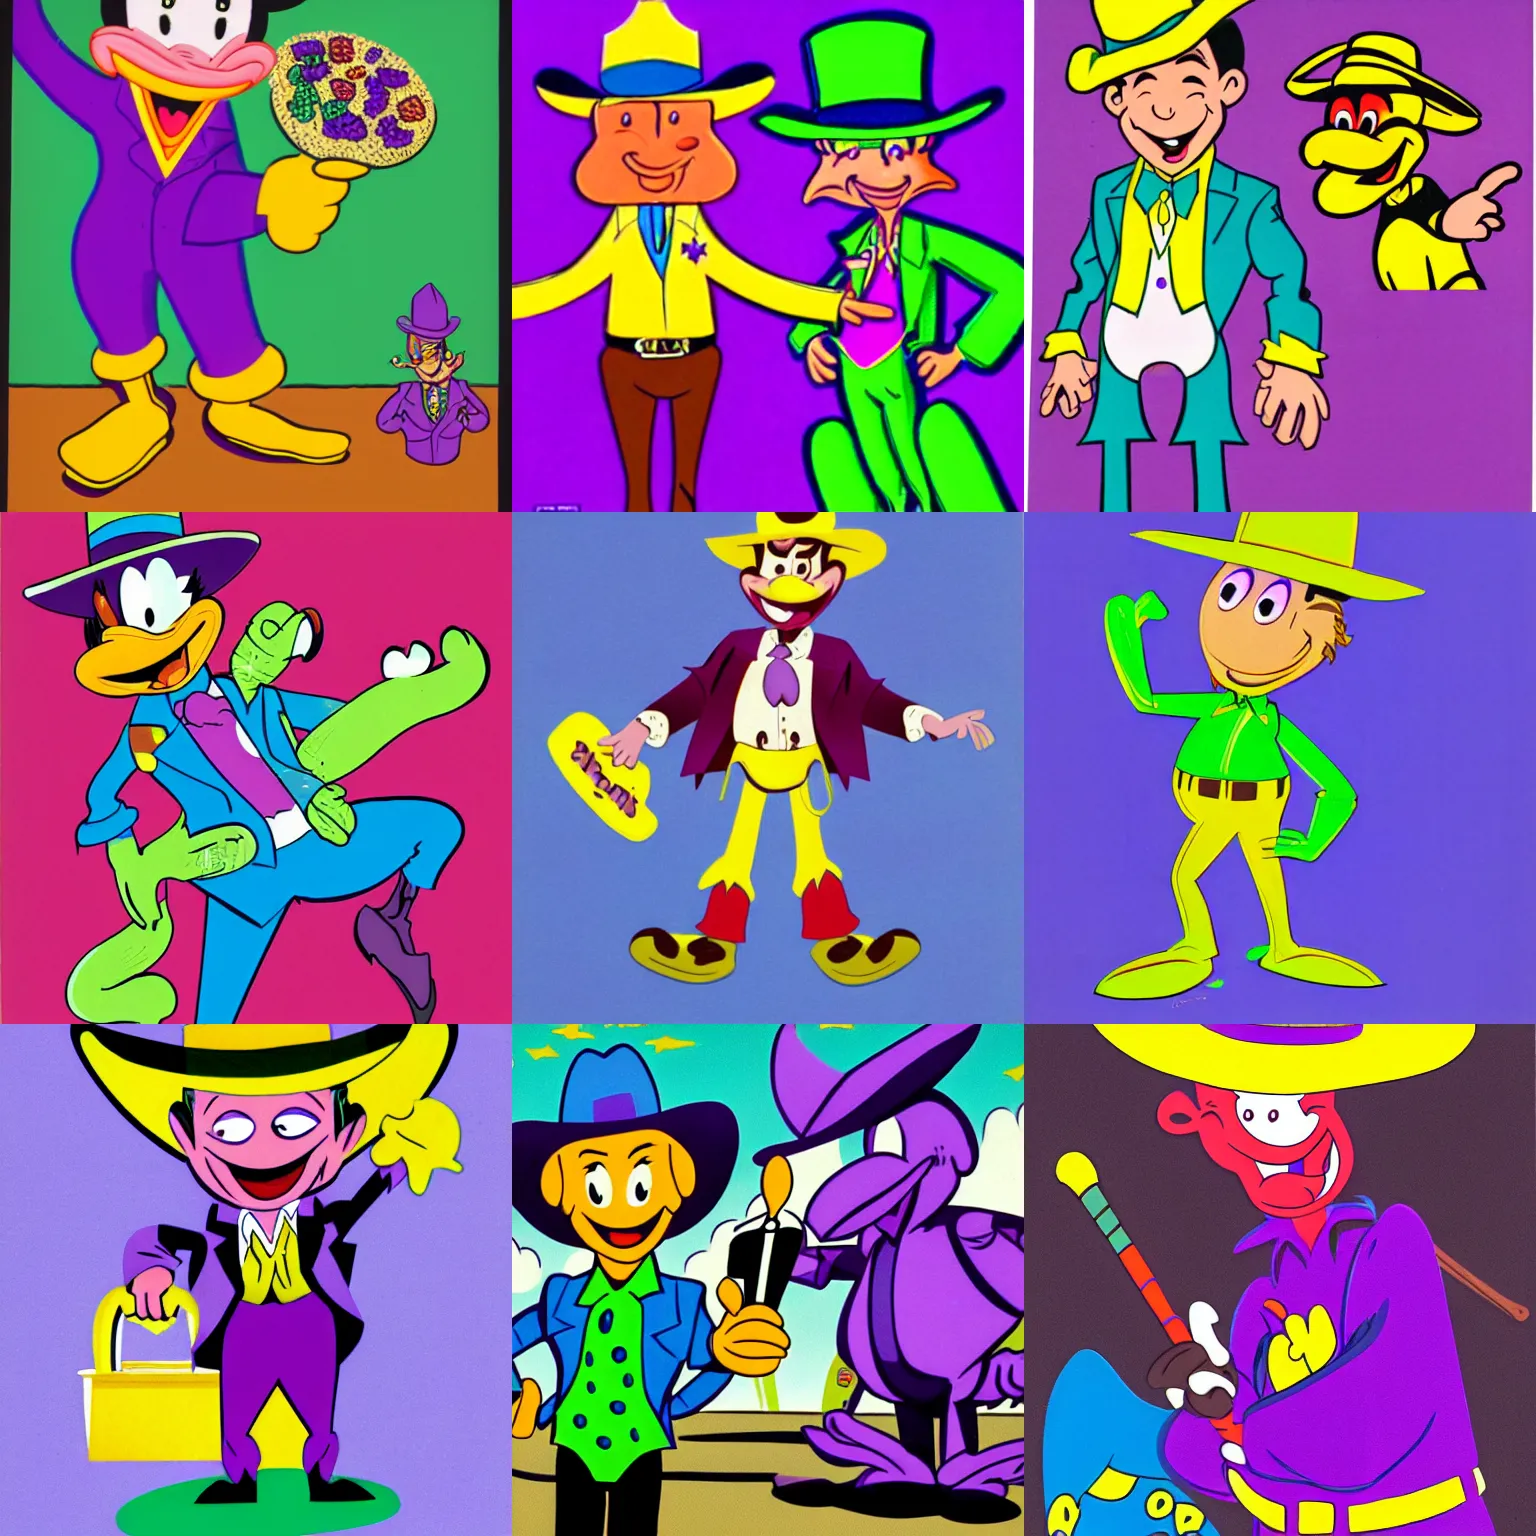 Prompt: 1990's childrens cartoon cereal mascot resembling a purple alligator cowboy salesman standing in front of blank background, character design by disney